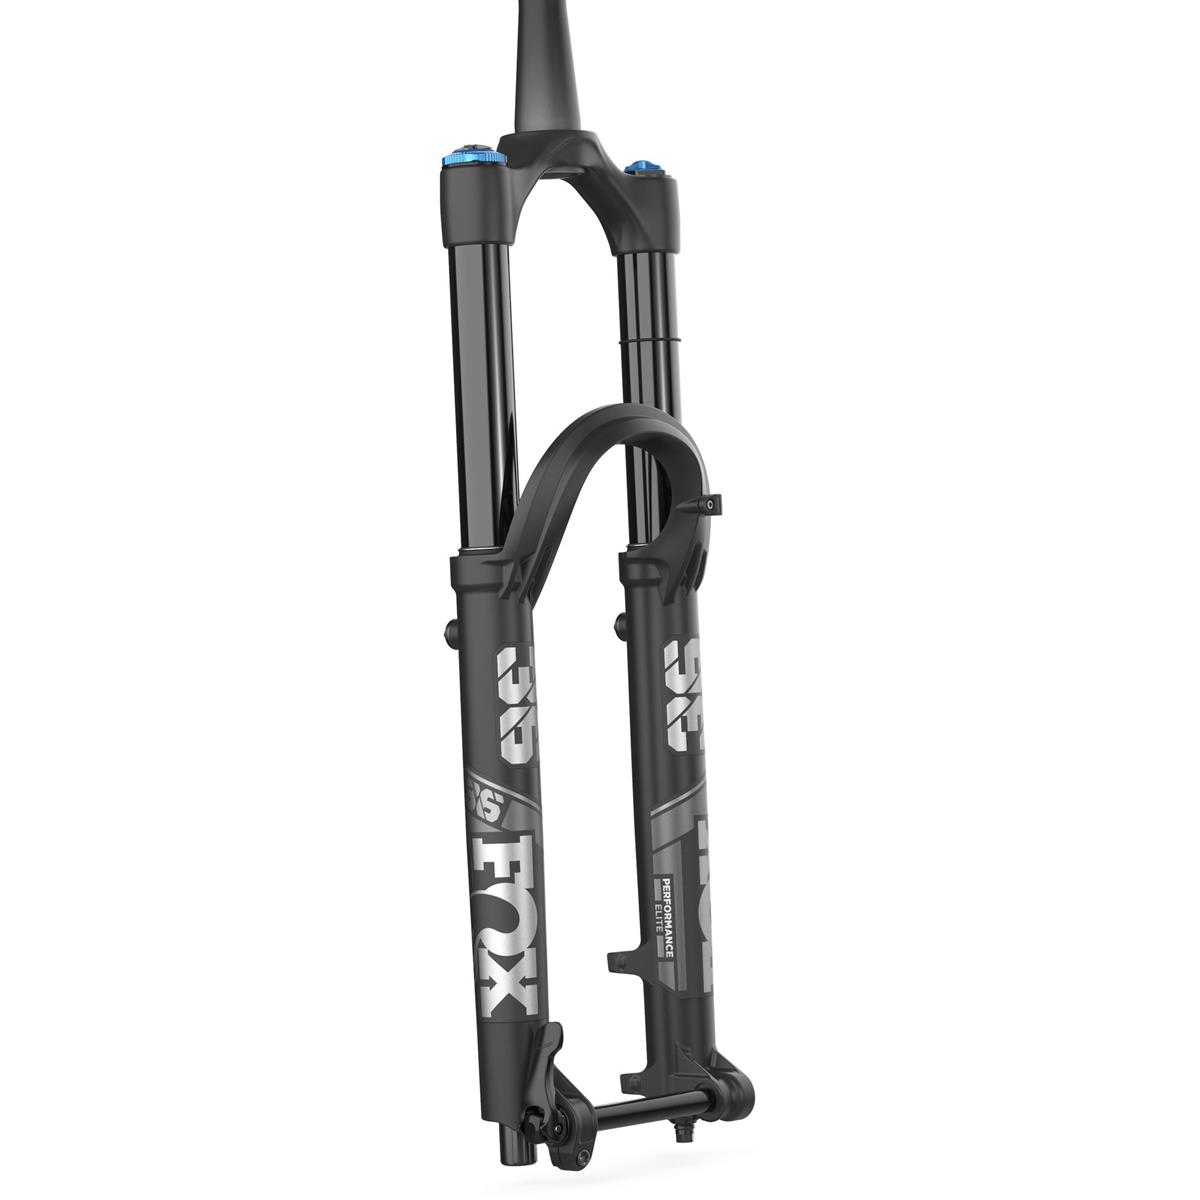 Fox Racing Shox Forcella 36 Float Performance Elite 29 Pollici, 15x110 mm, GRIP 2, 44 mm Offset, 160 mm